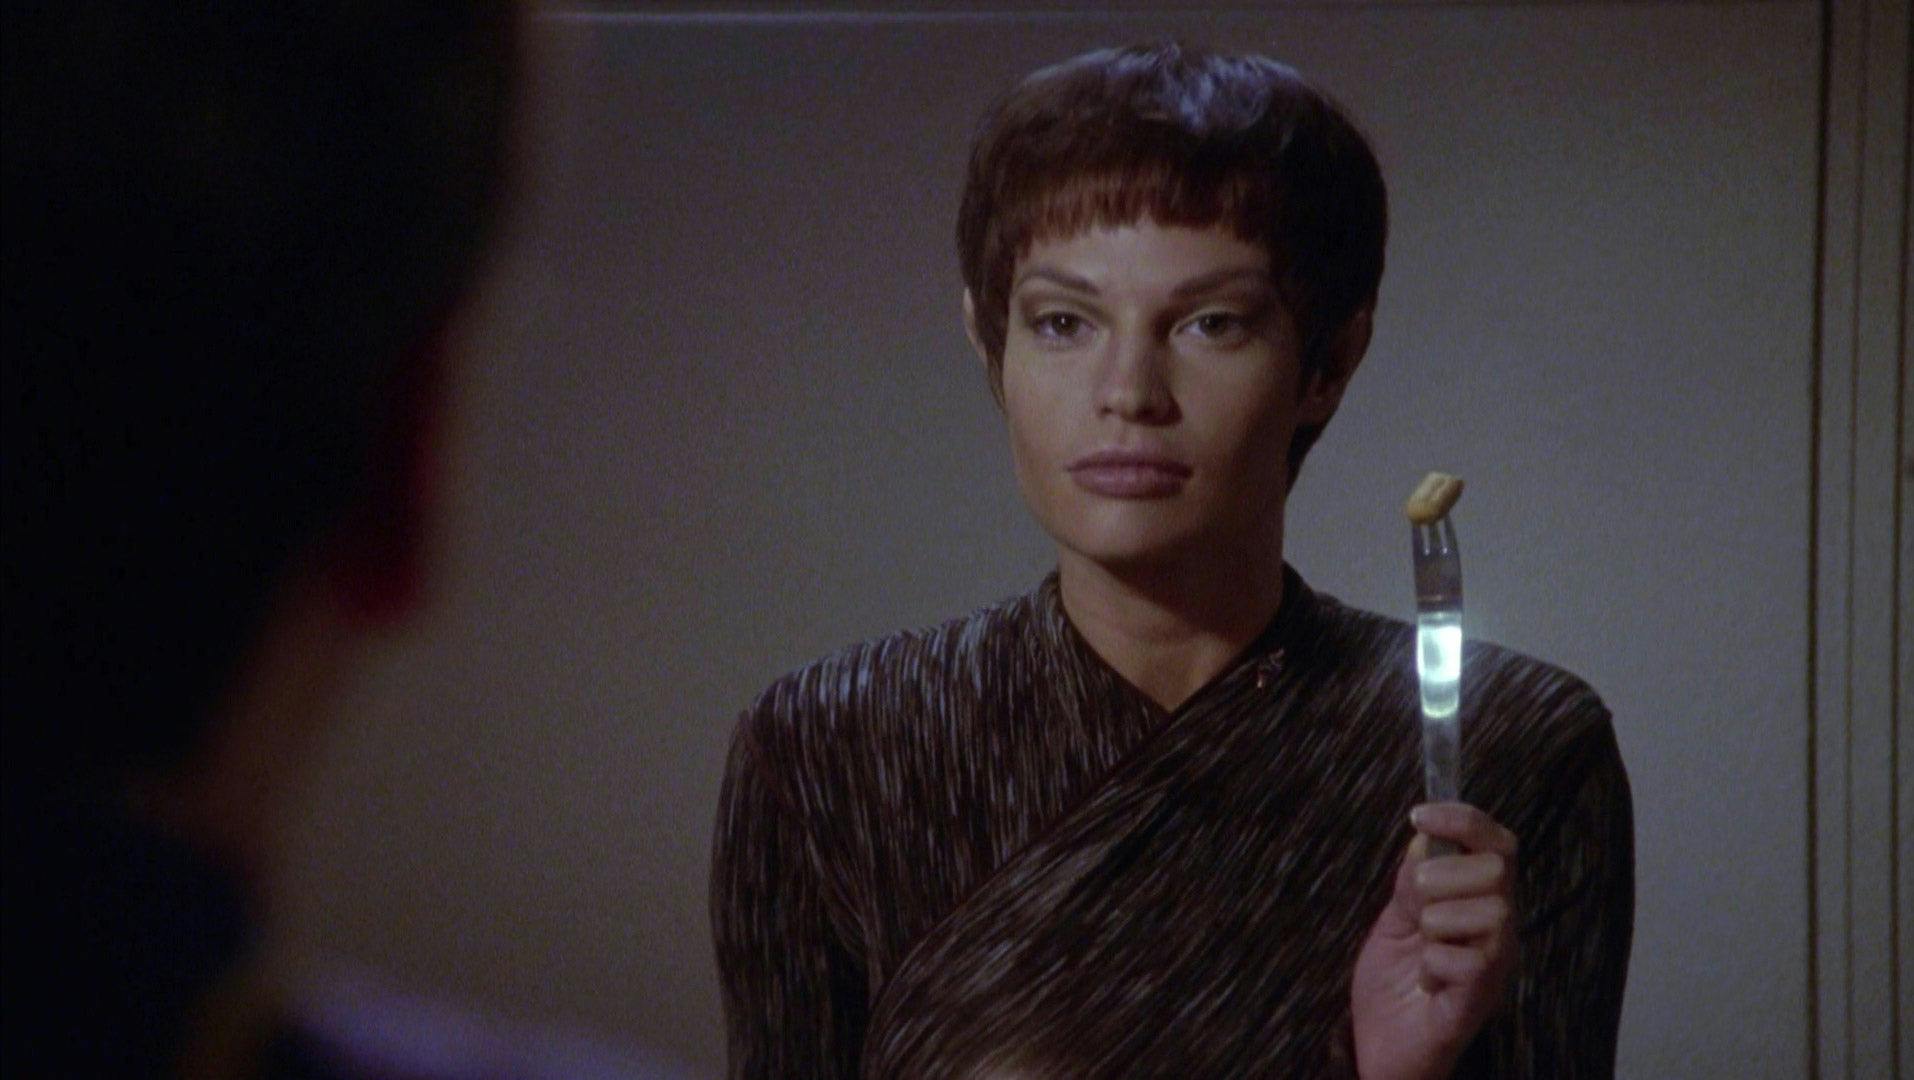 T'Pol eats a breadstick with a knife and fork and proudly raises it up